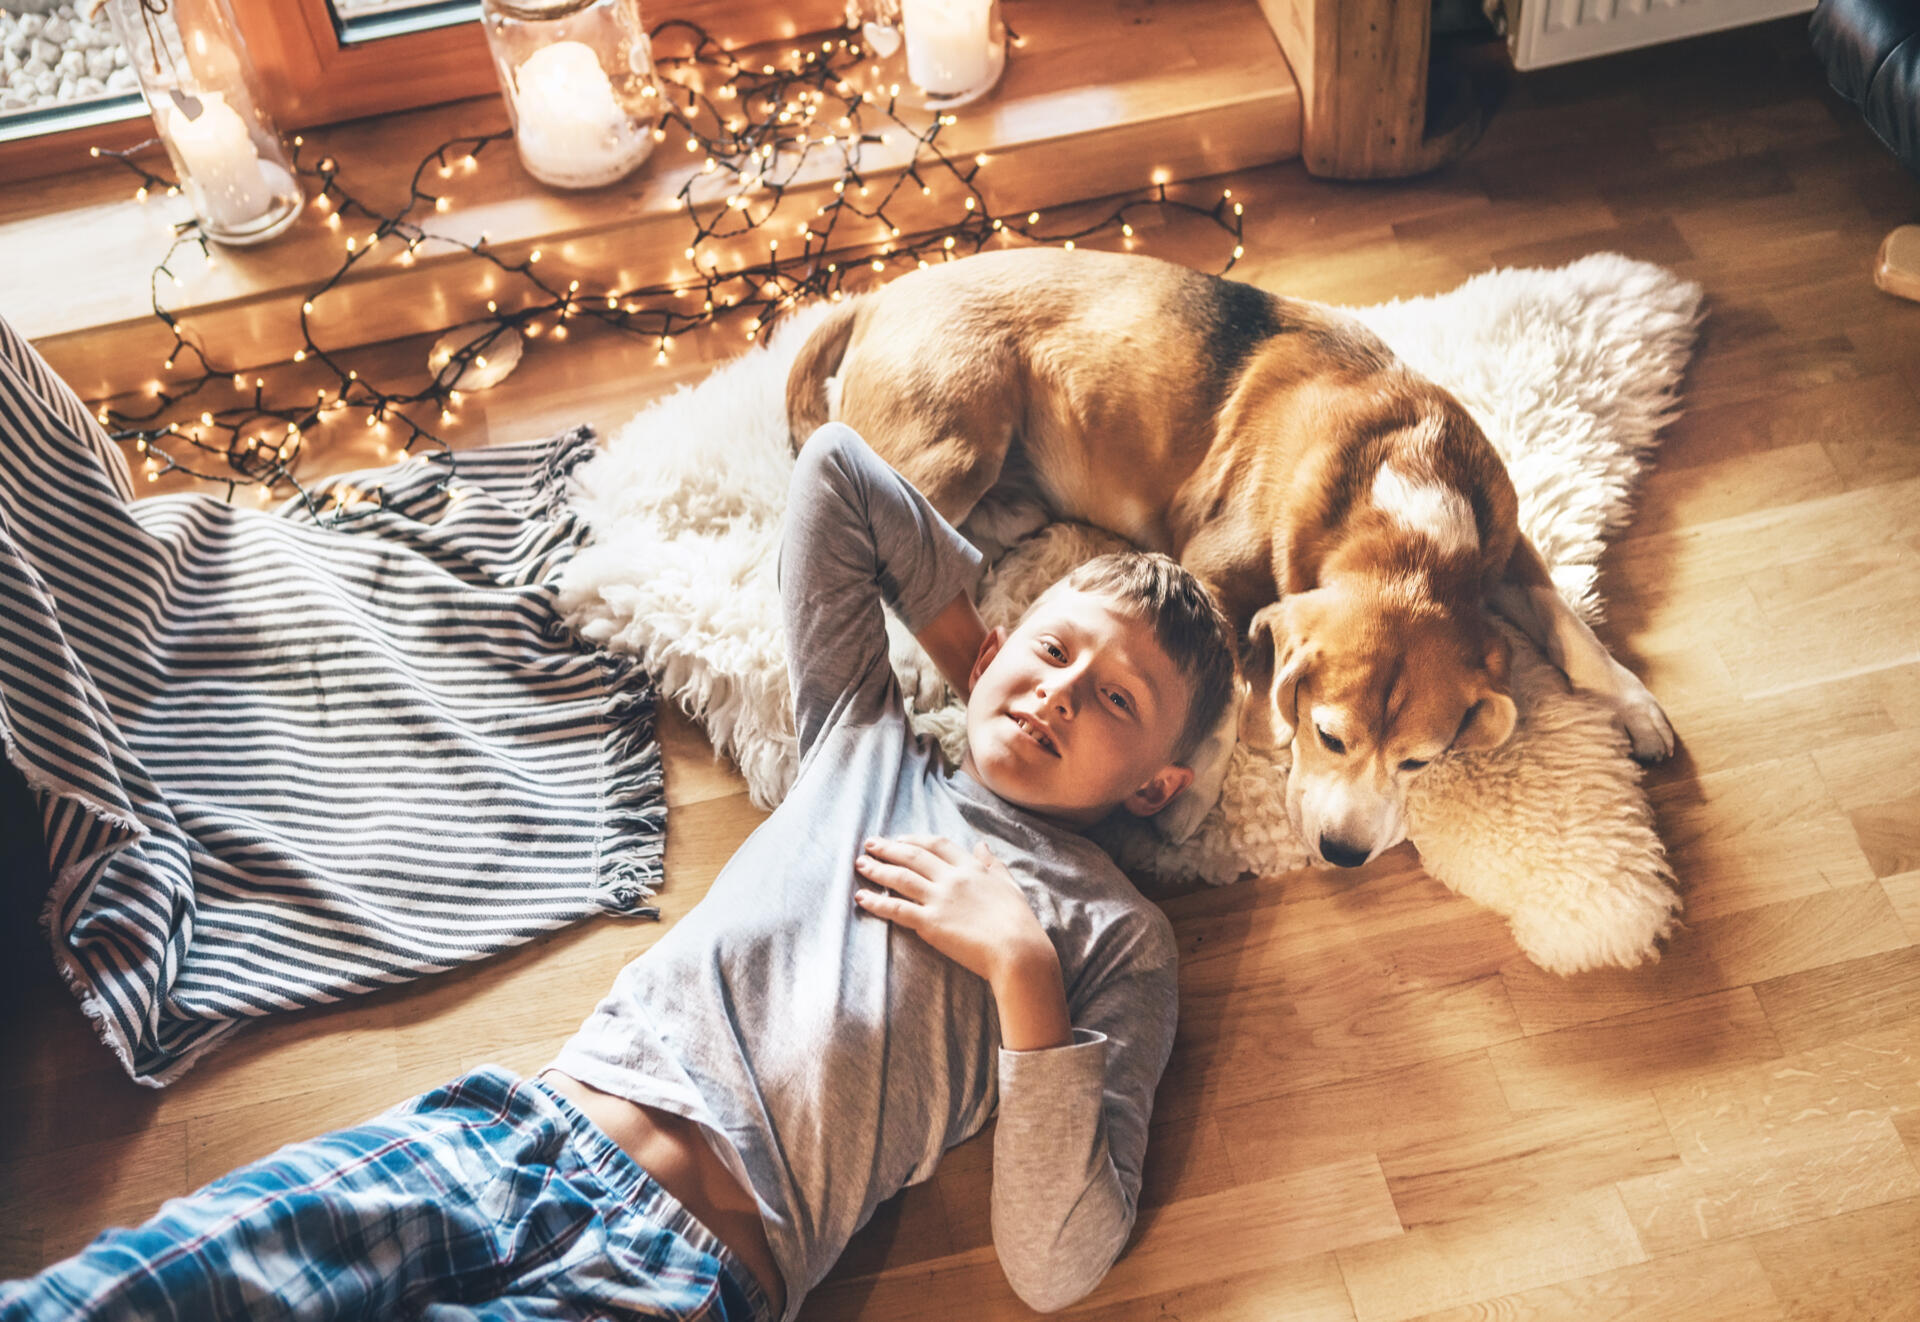 Boy lying on the floor and smiling near slipping his beagle dog on sheepskin in cozy home atmosphere. Peaceful moments of cozy home concept image.